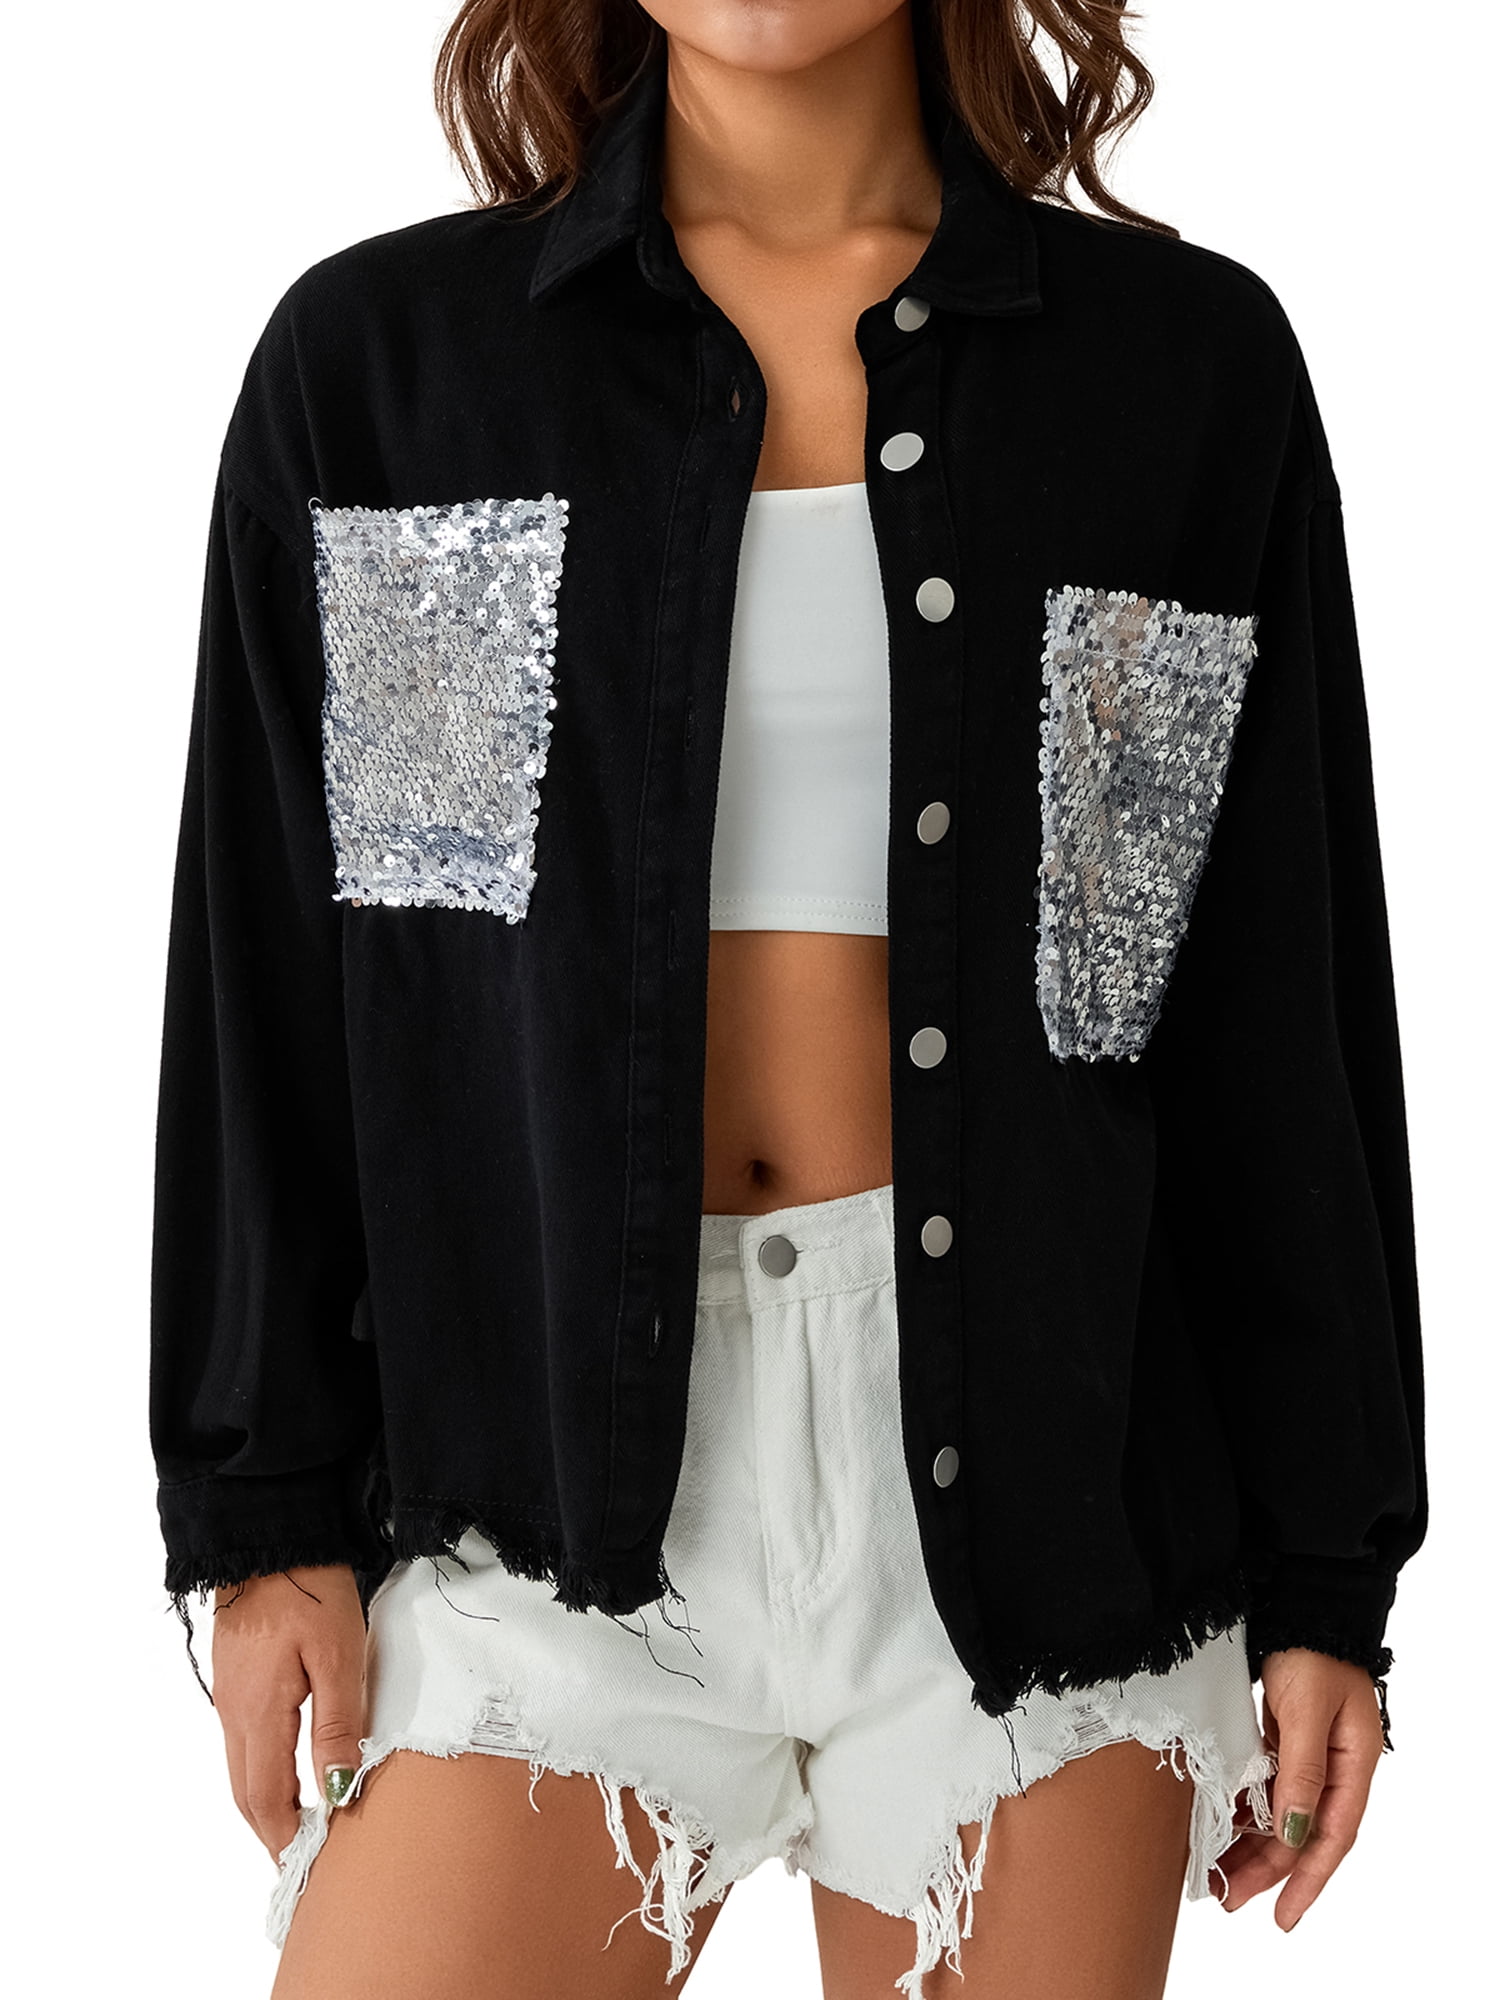 ebossy Women's Glitter Sequined Sleeve Ripped Hole Destroyed Oversized Denim  Jean Jacket (Small, Blue) at Amazon Women's Coats Shop